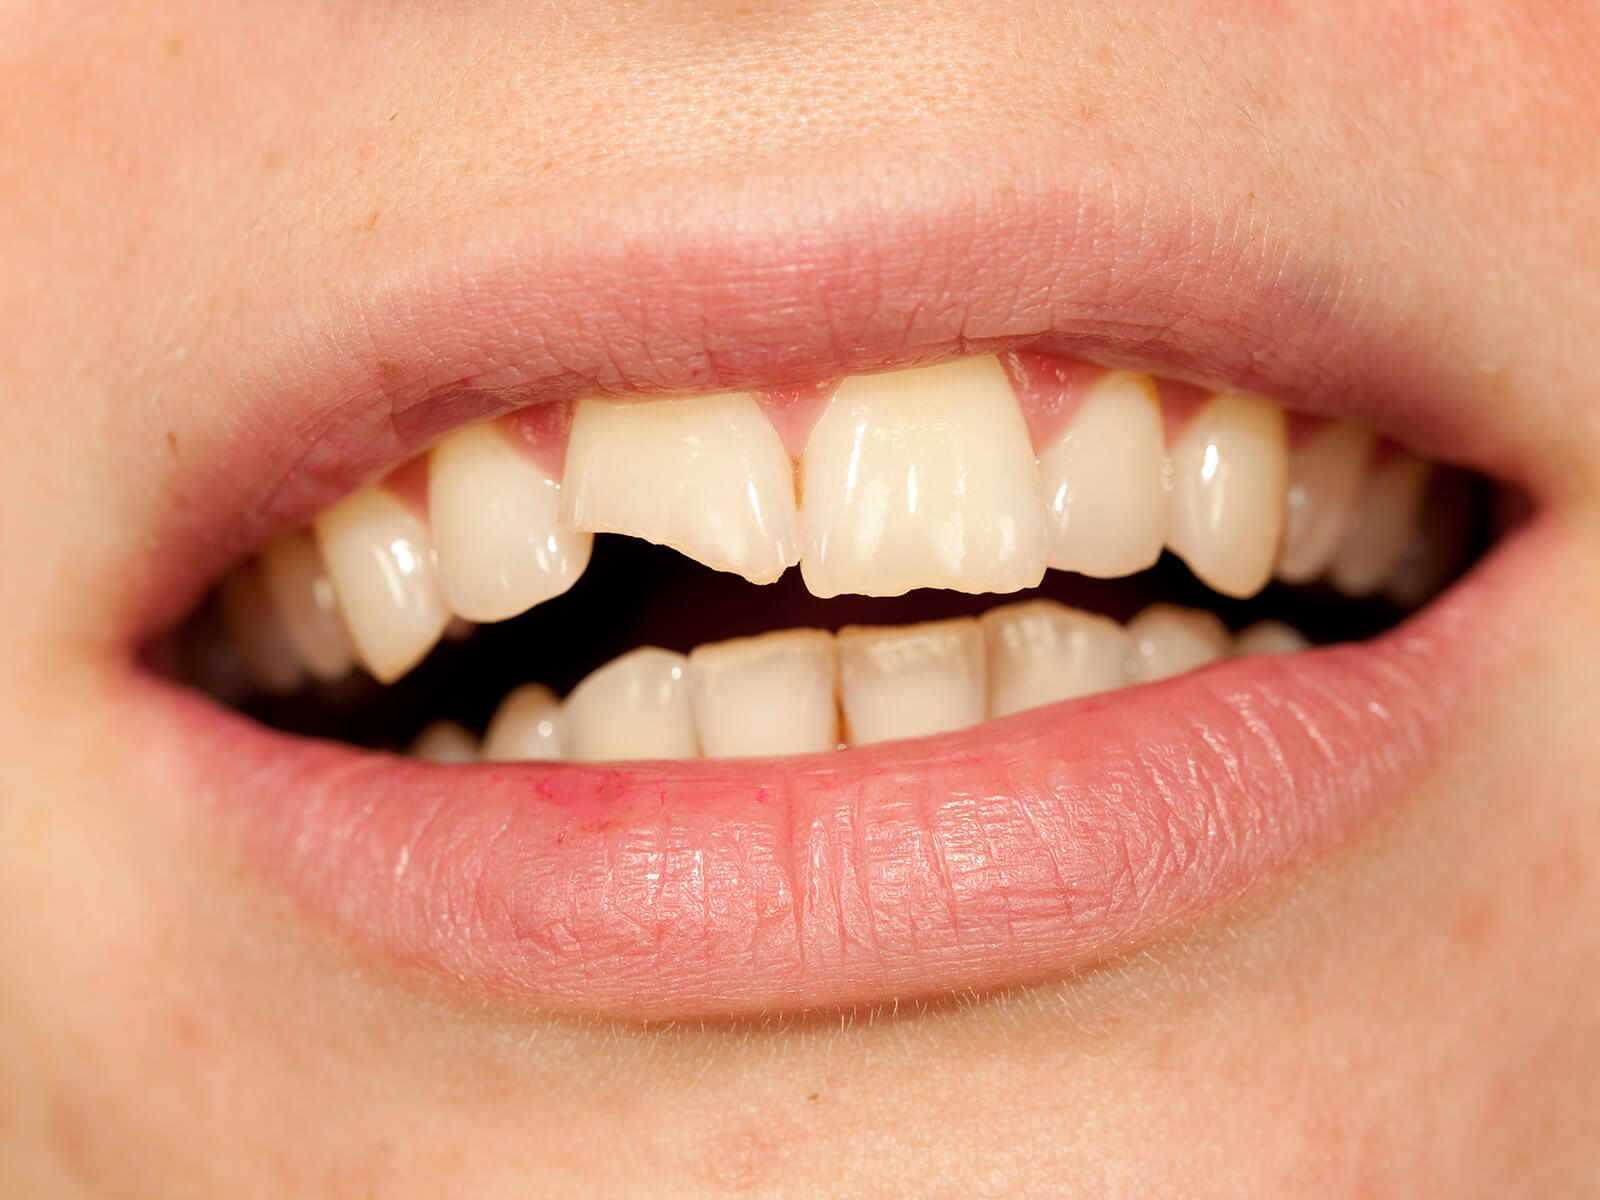 Self-Care Tips For Your Chipped or Broken Tooth